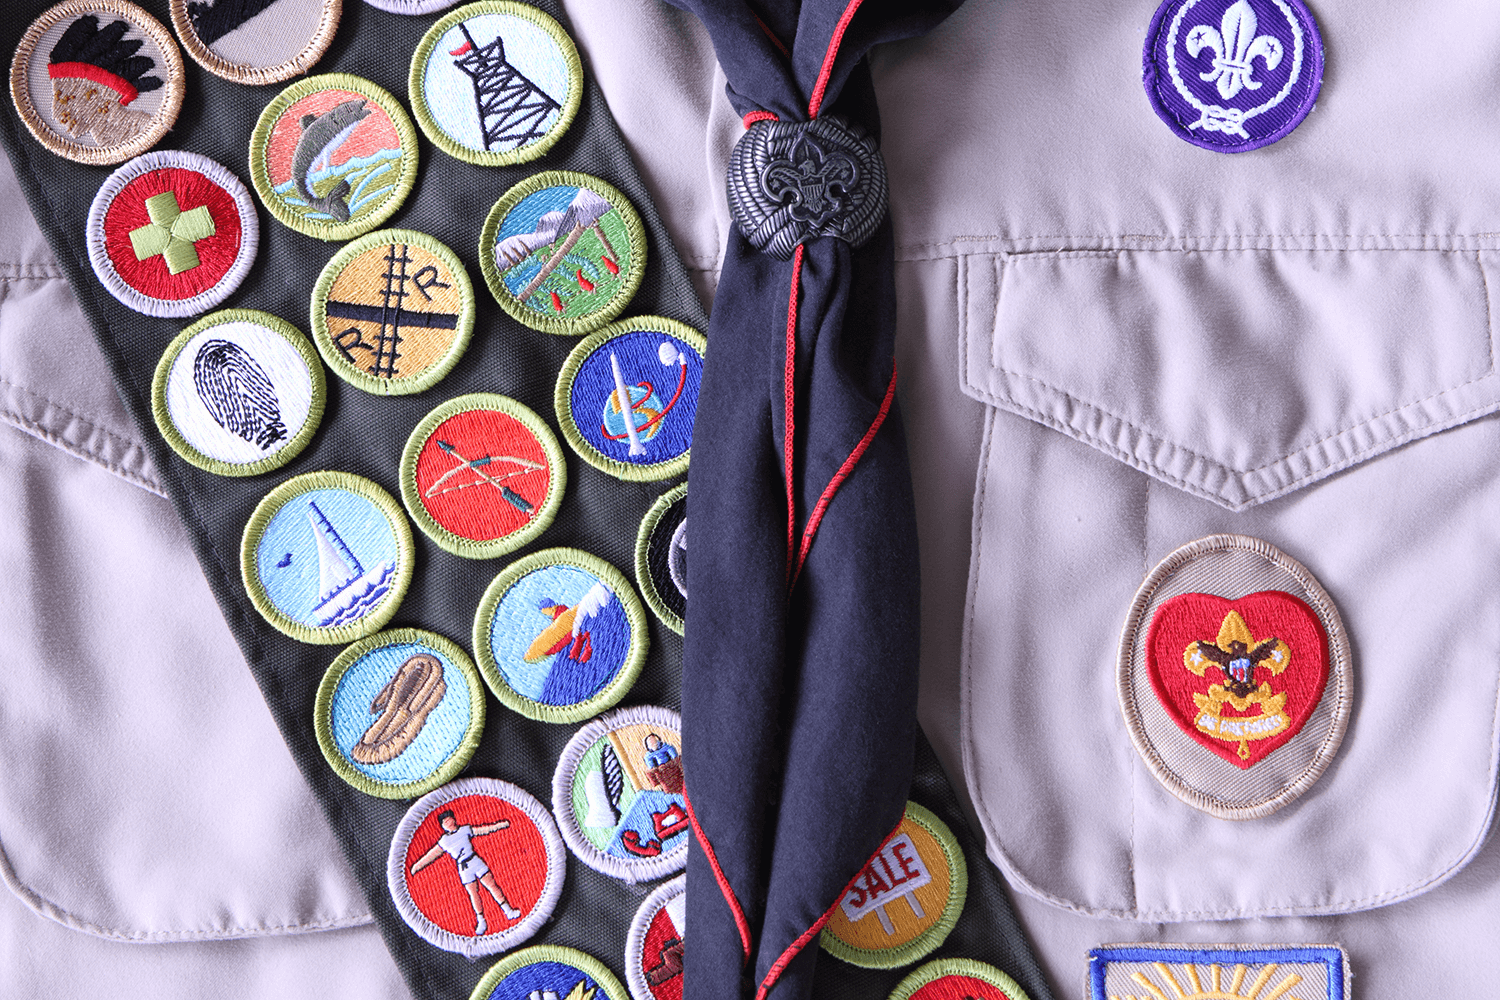 Former Boy Scout Leader Chad Tucker Pleas Guilty To Sexual Interference's article image